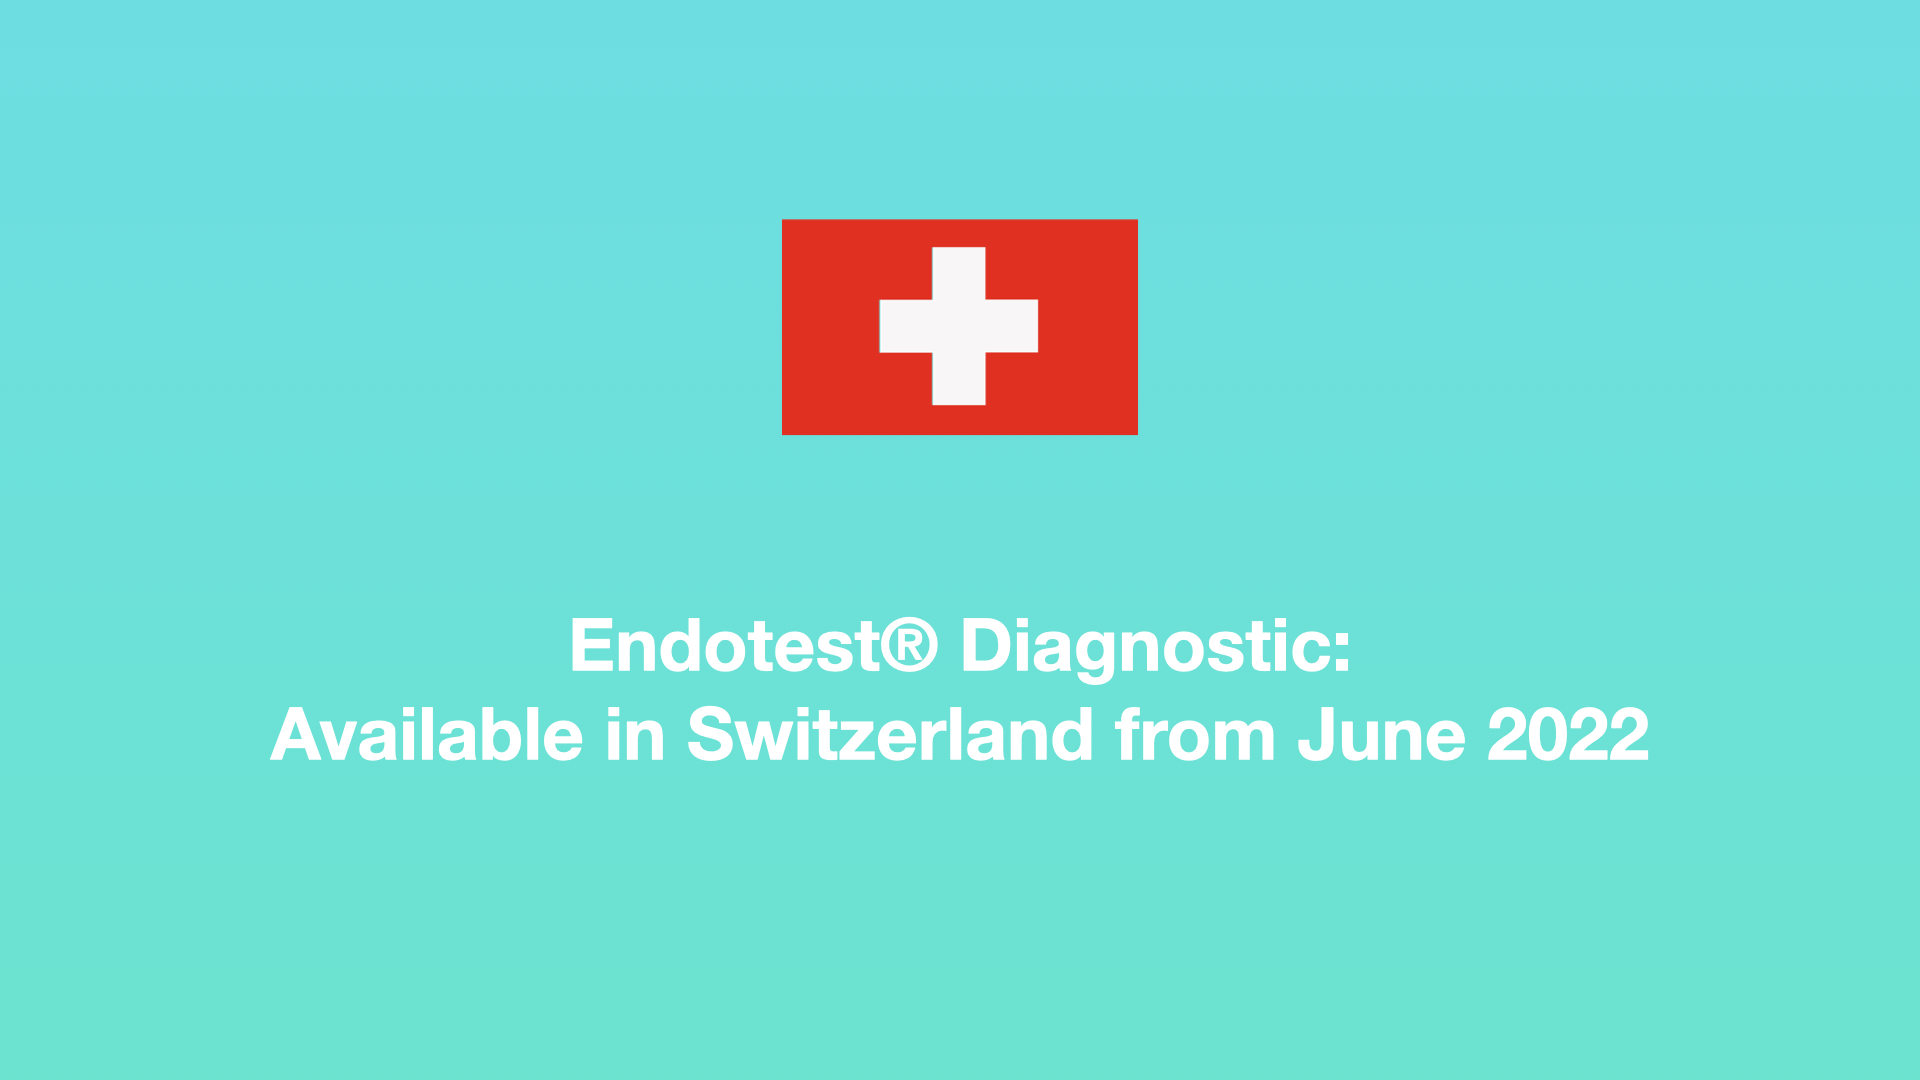 Endotest® will be available in Switzerland as from 1 June 2022